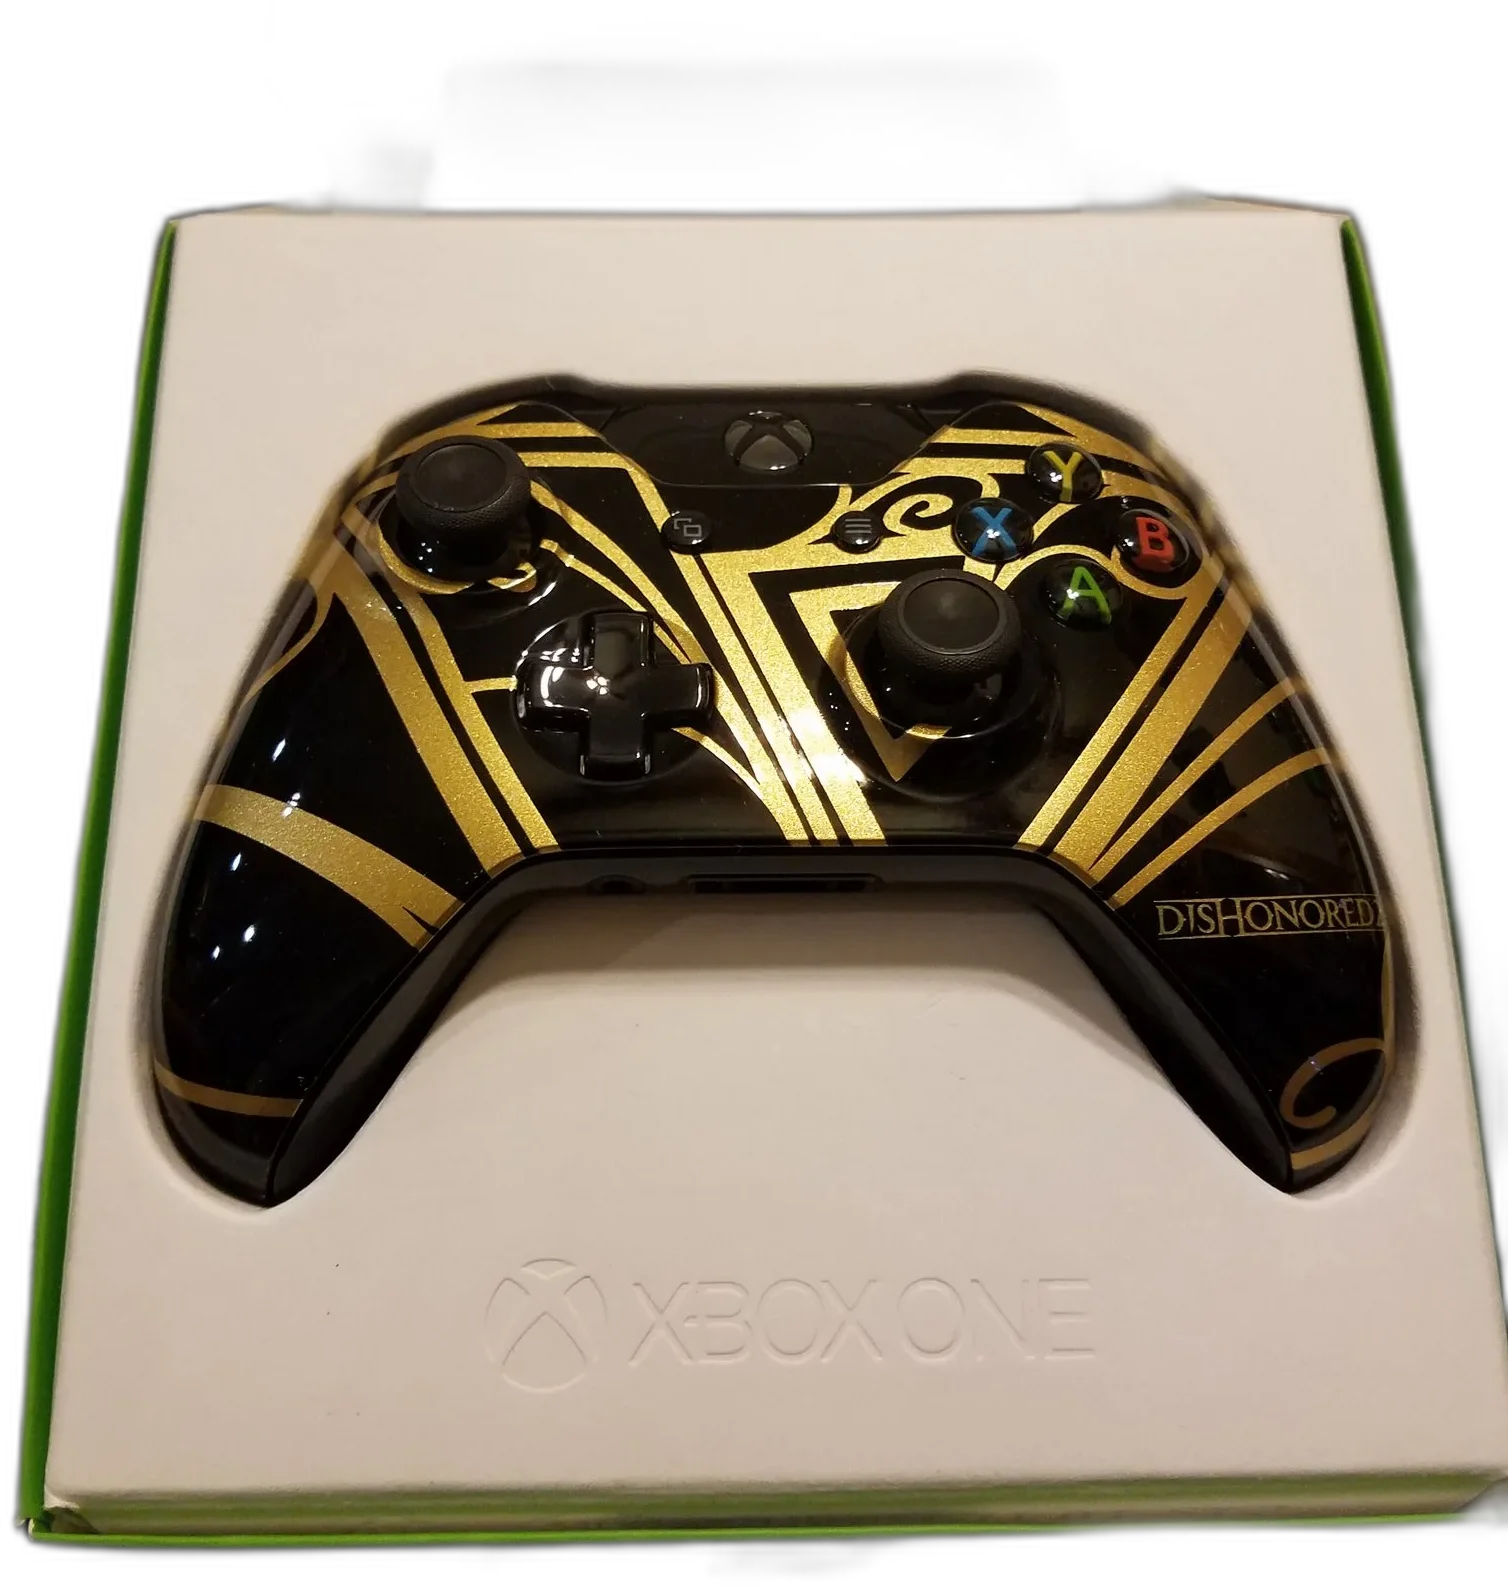  Microsoft Xbox One Dishonored 2 Controller